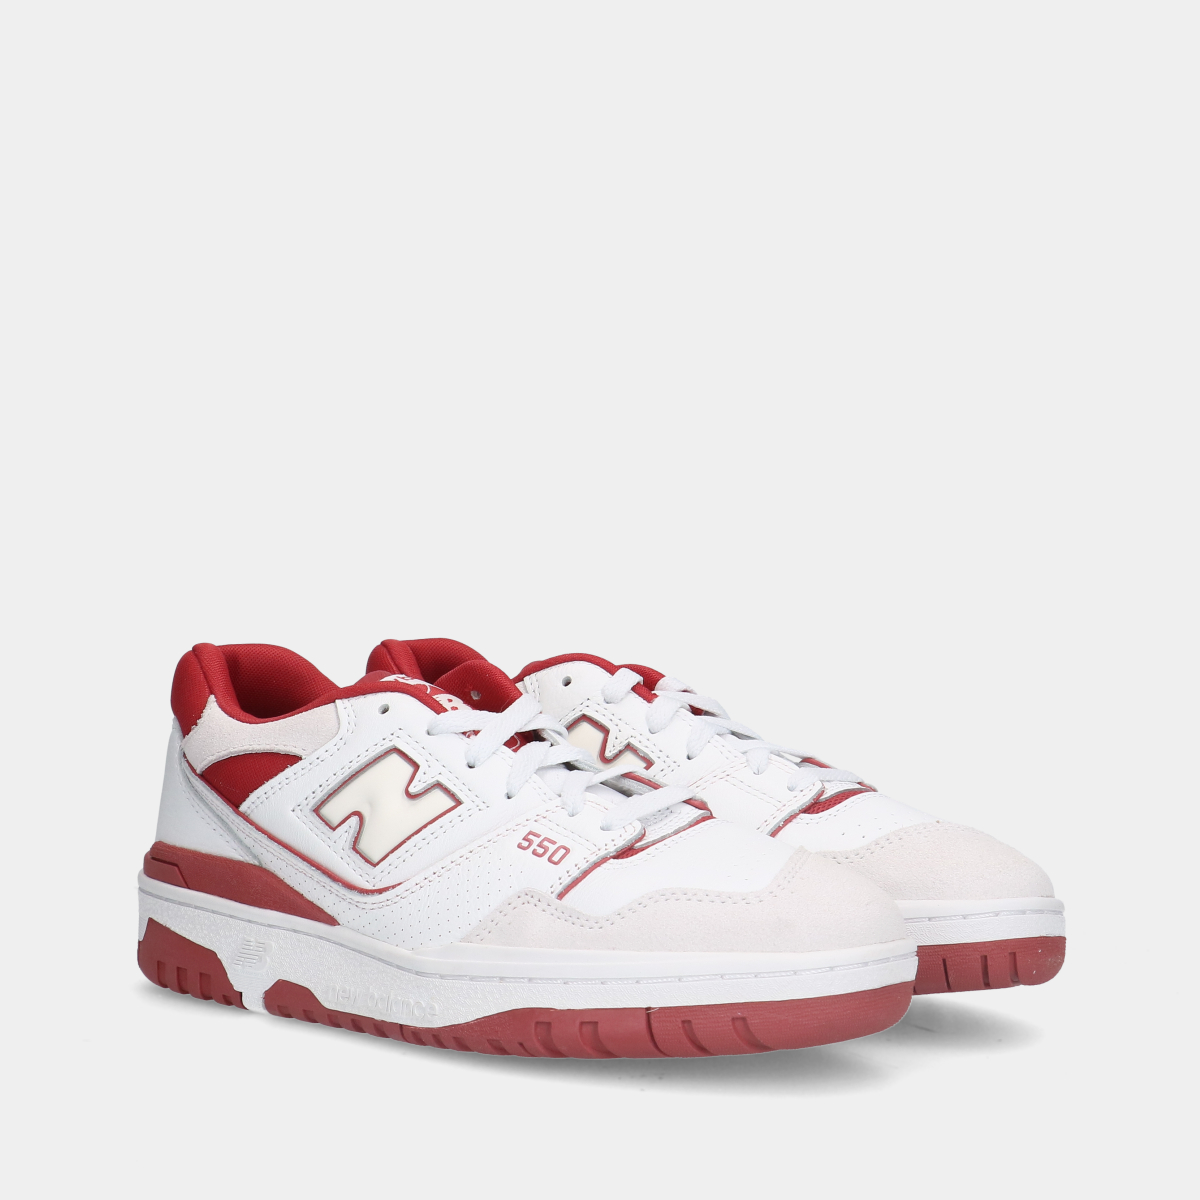 New Balance 550 White/Red sneakers